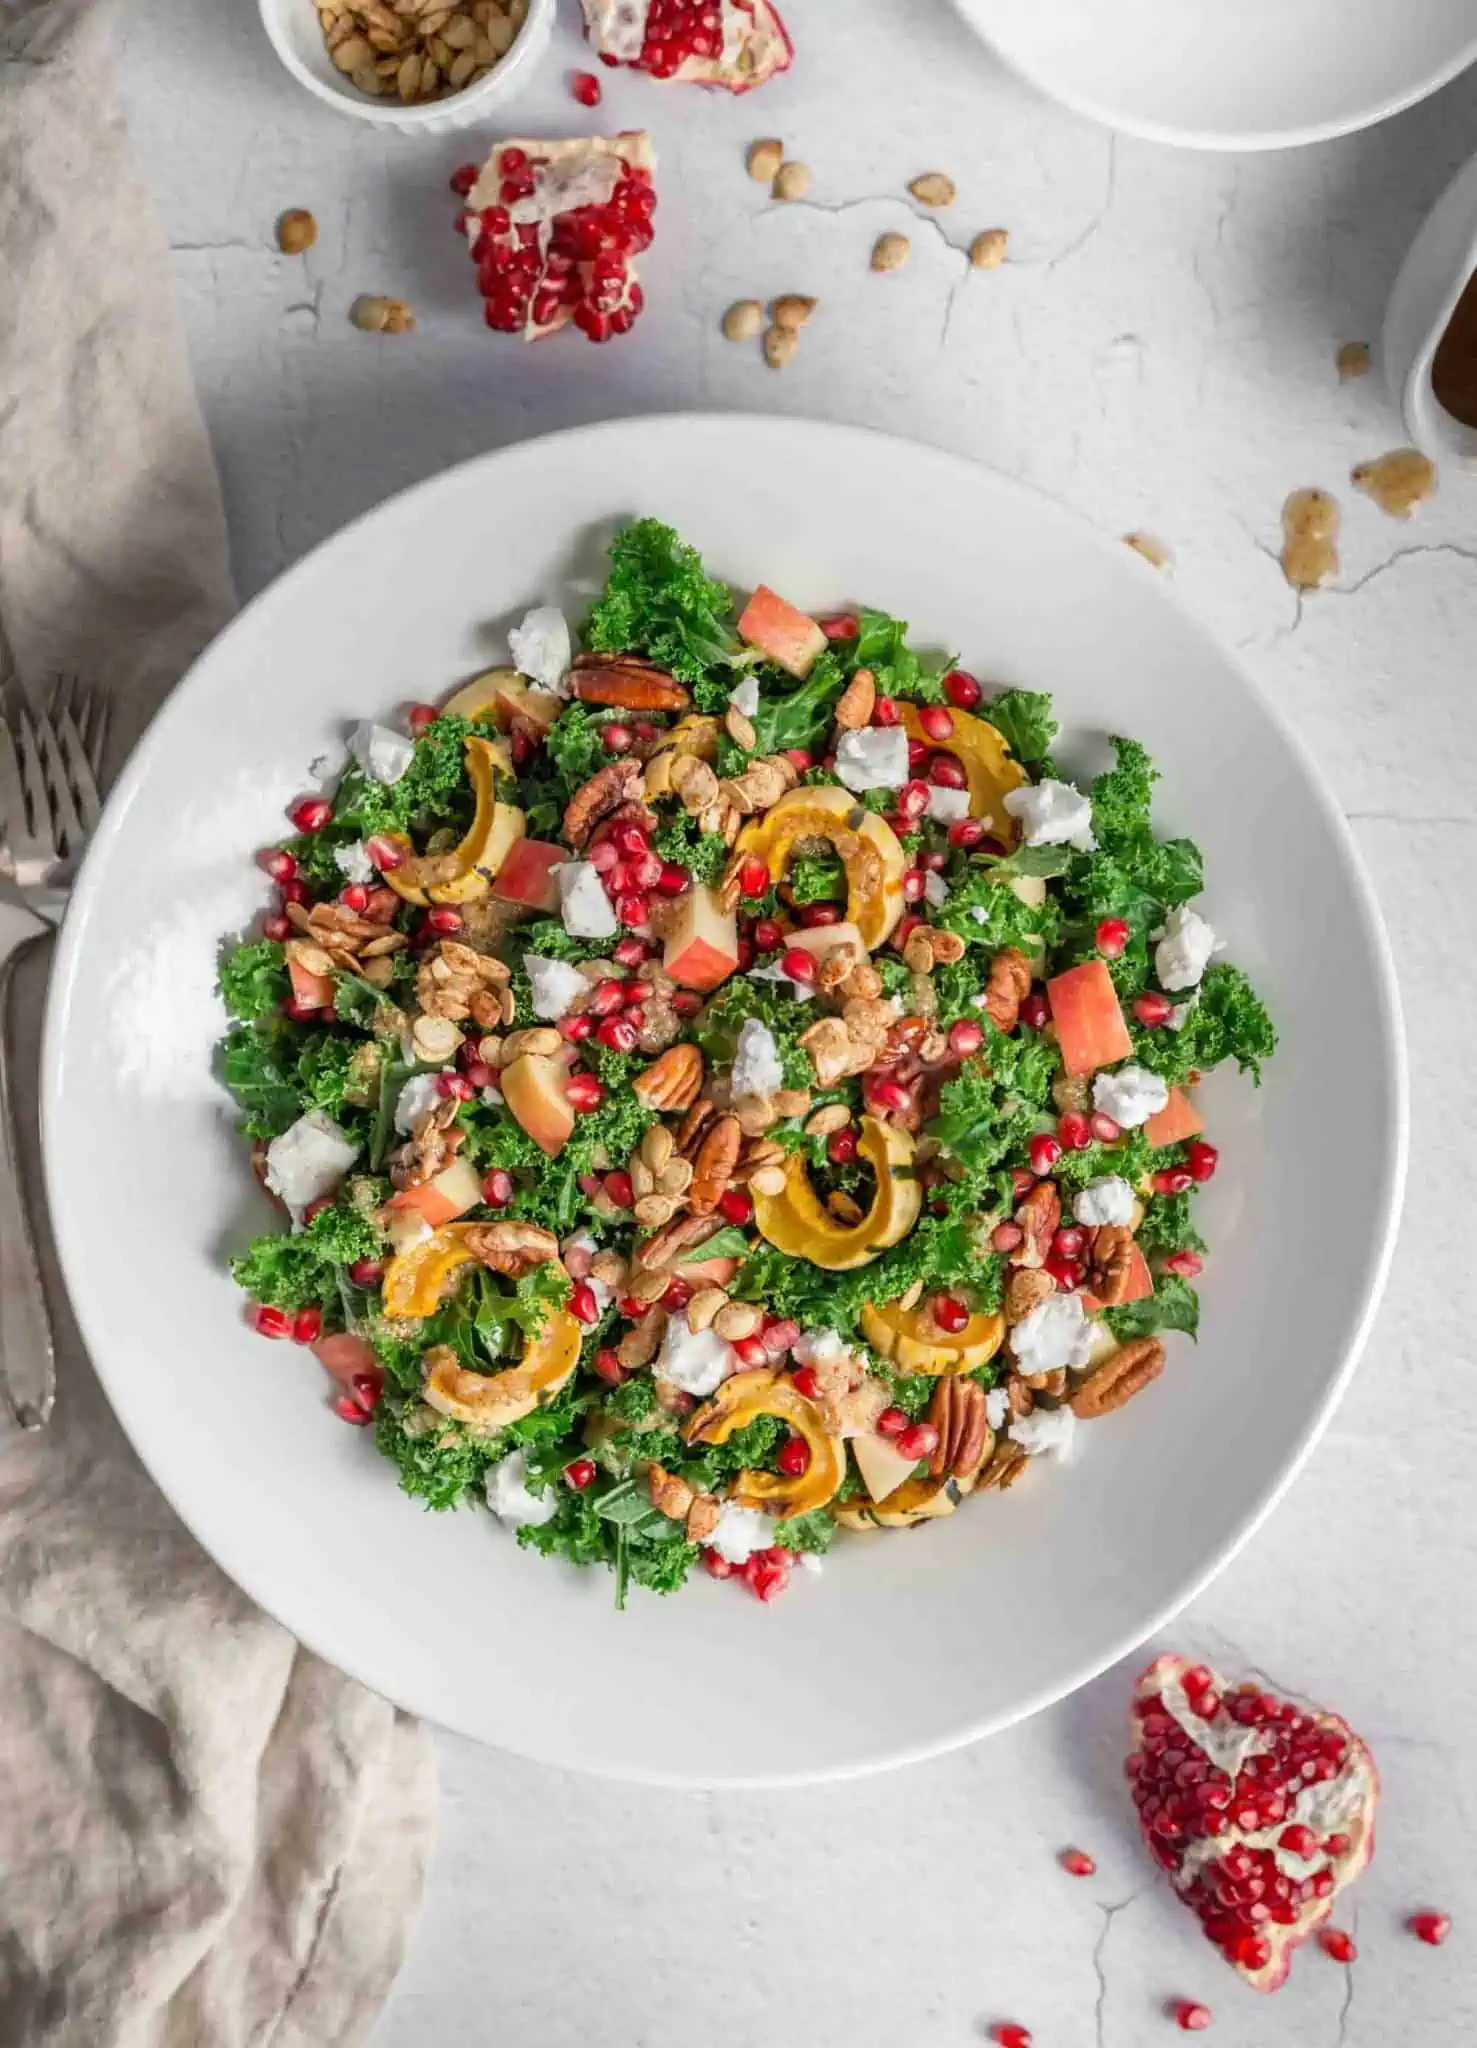 Easy Plant-Based Squash Kale Salad for Vegan Thanksgiving Flatlay on a White Plate